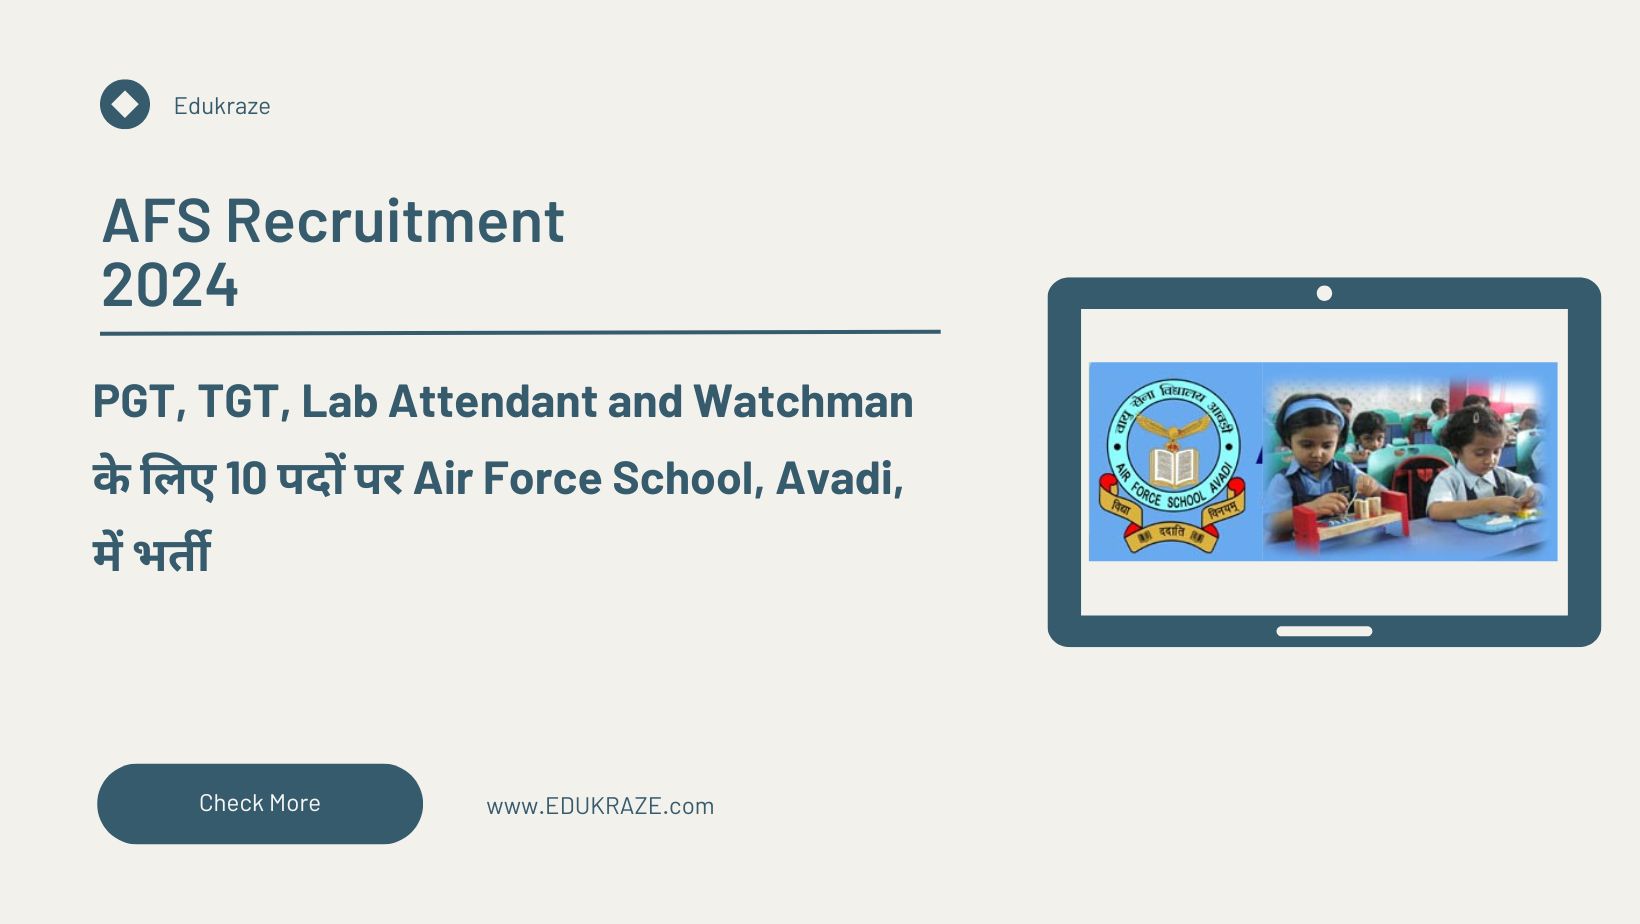 AFS Recruitment 2024: PGT, TGT, Lab Attendant and Watchman